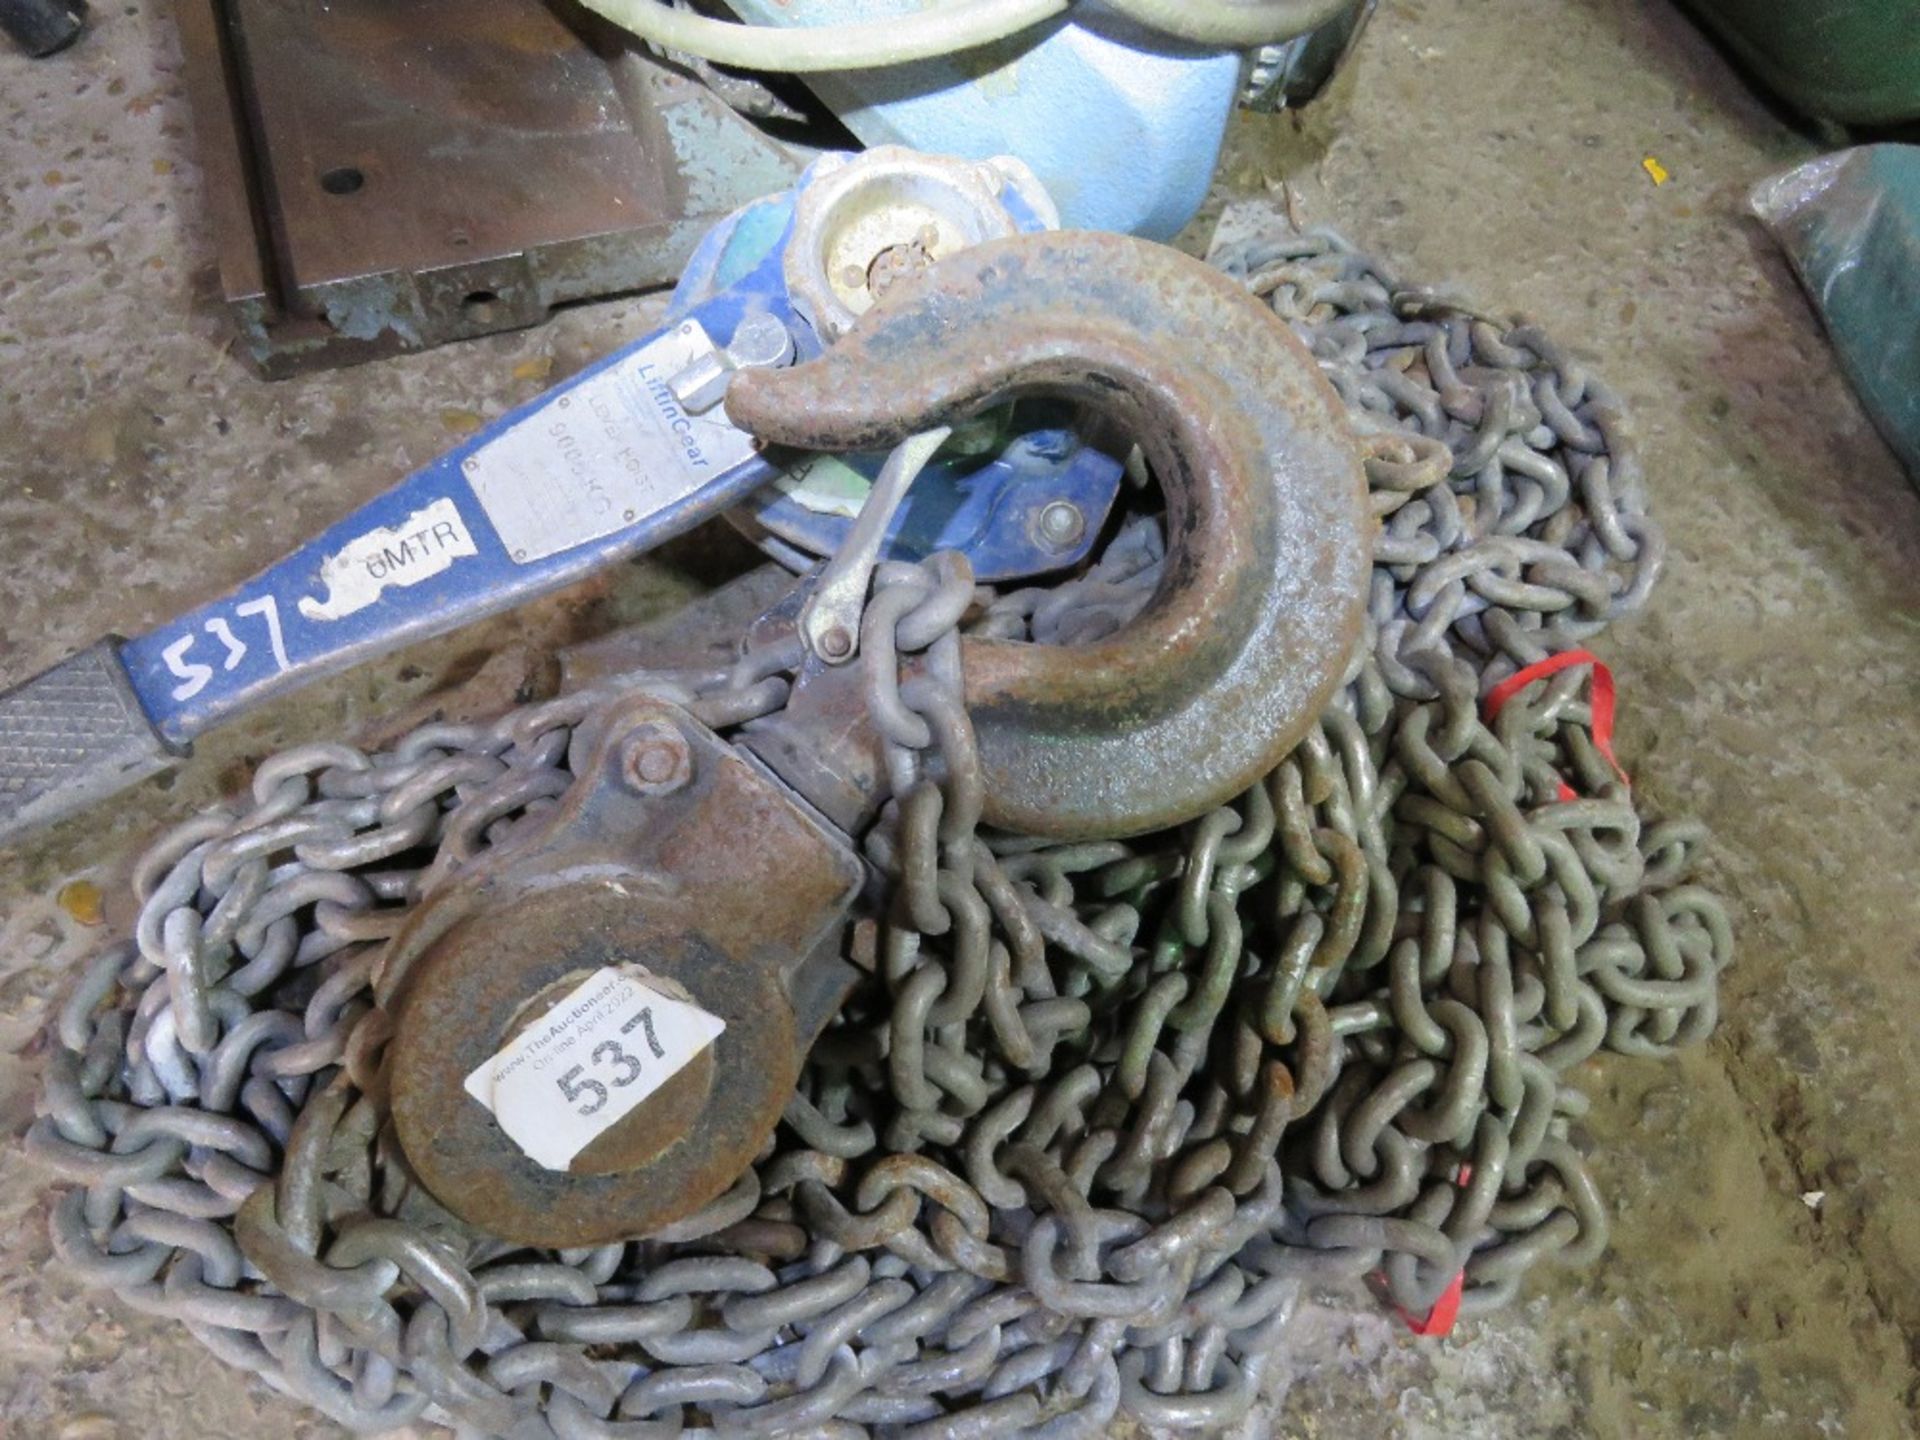 LIFTINGEAR 9000KG RATED RATCHET CHAIN HOIST/PULLER.. SOURCED FROM DEPOT CLEARANCE.